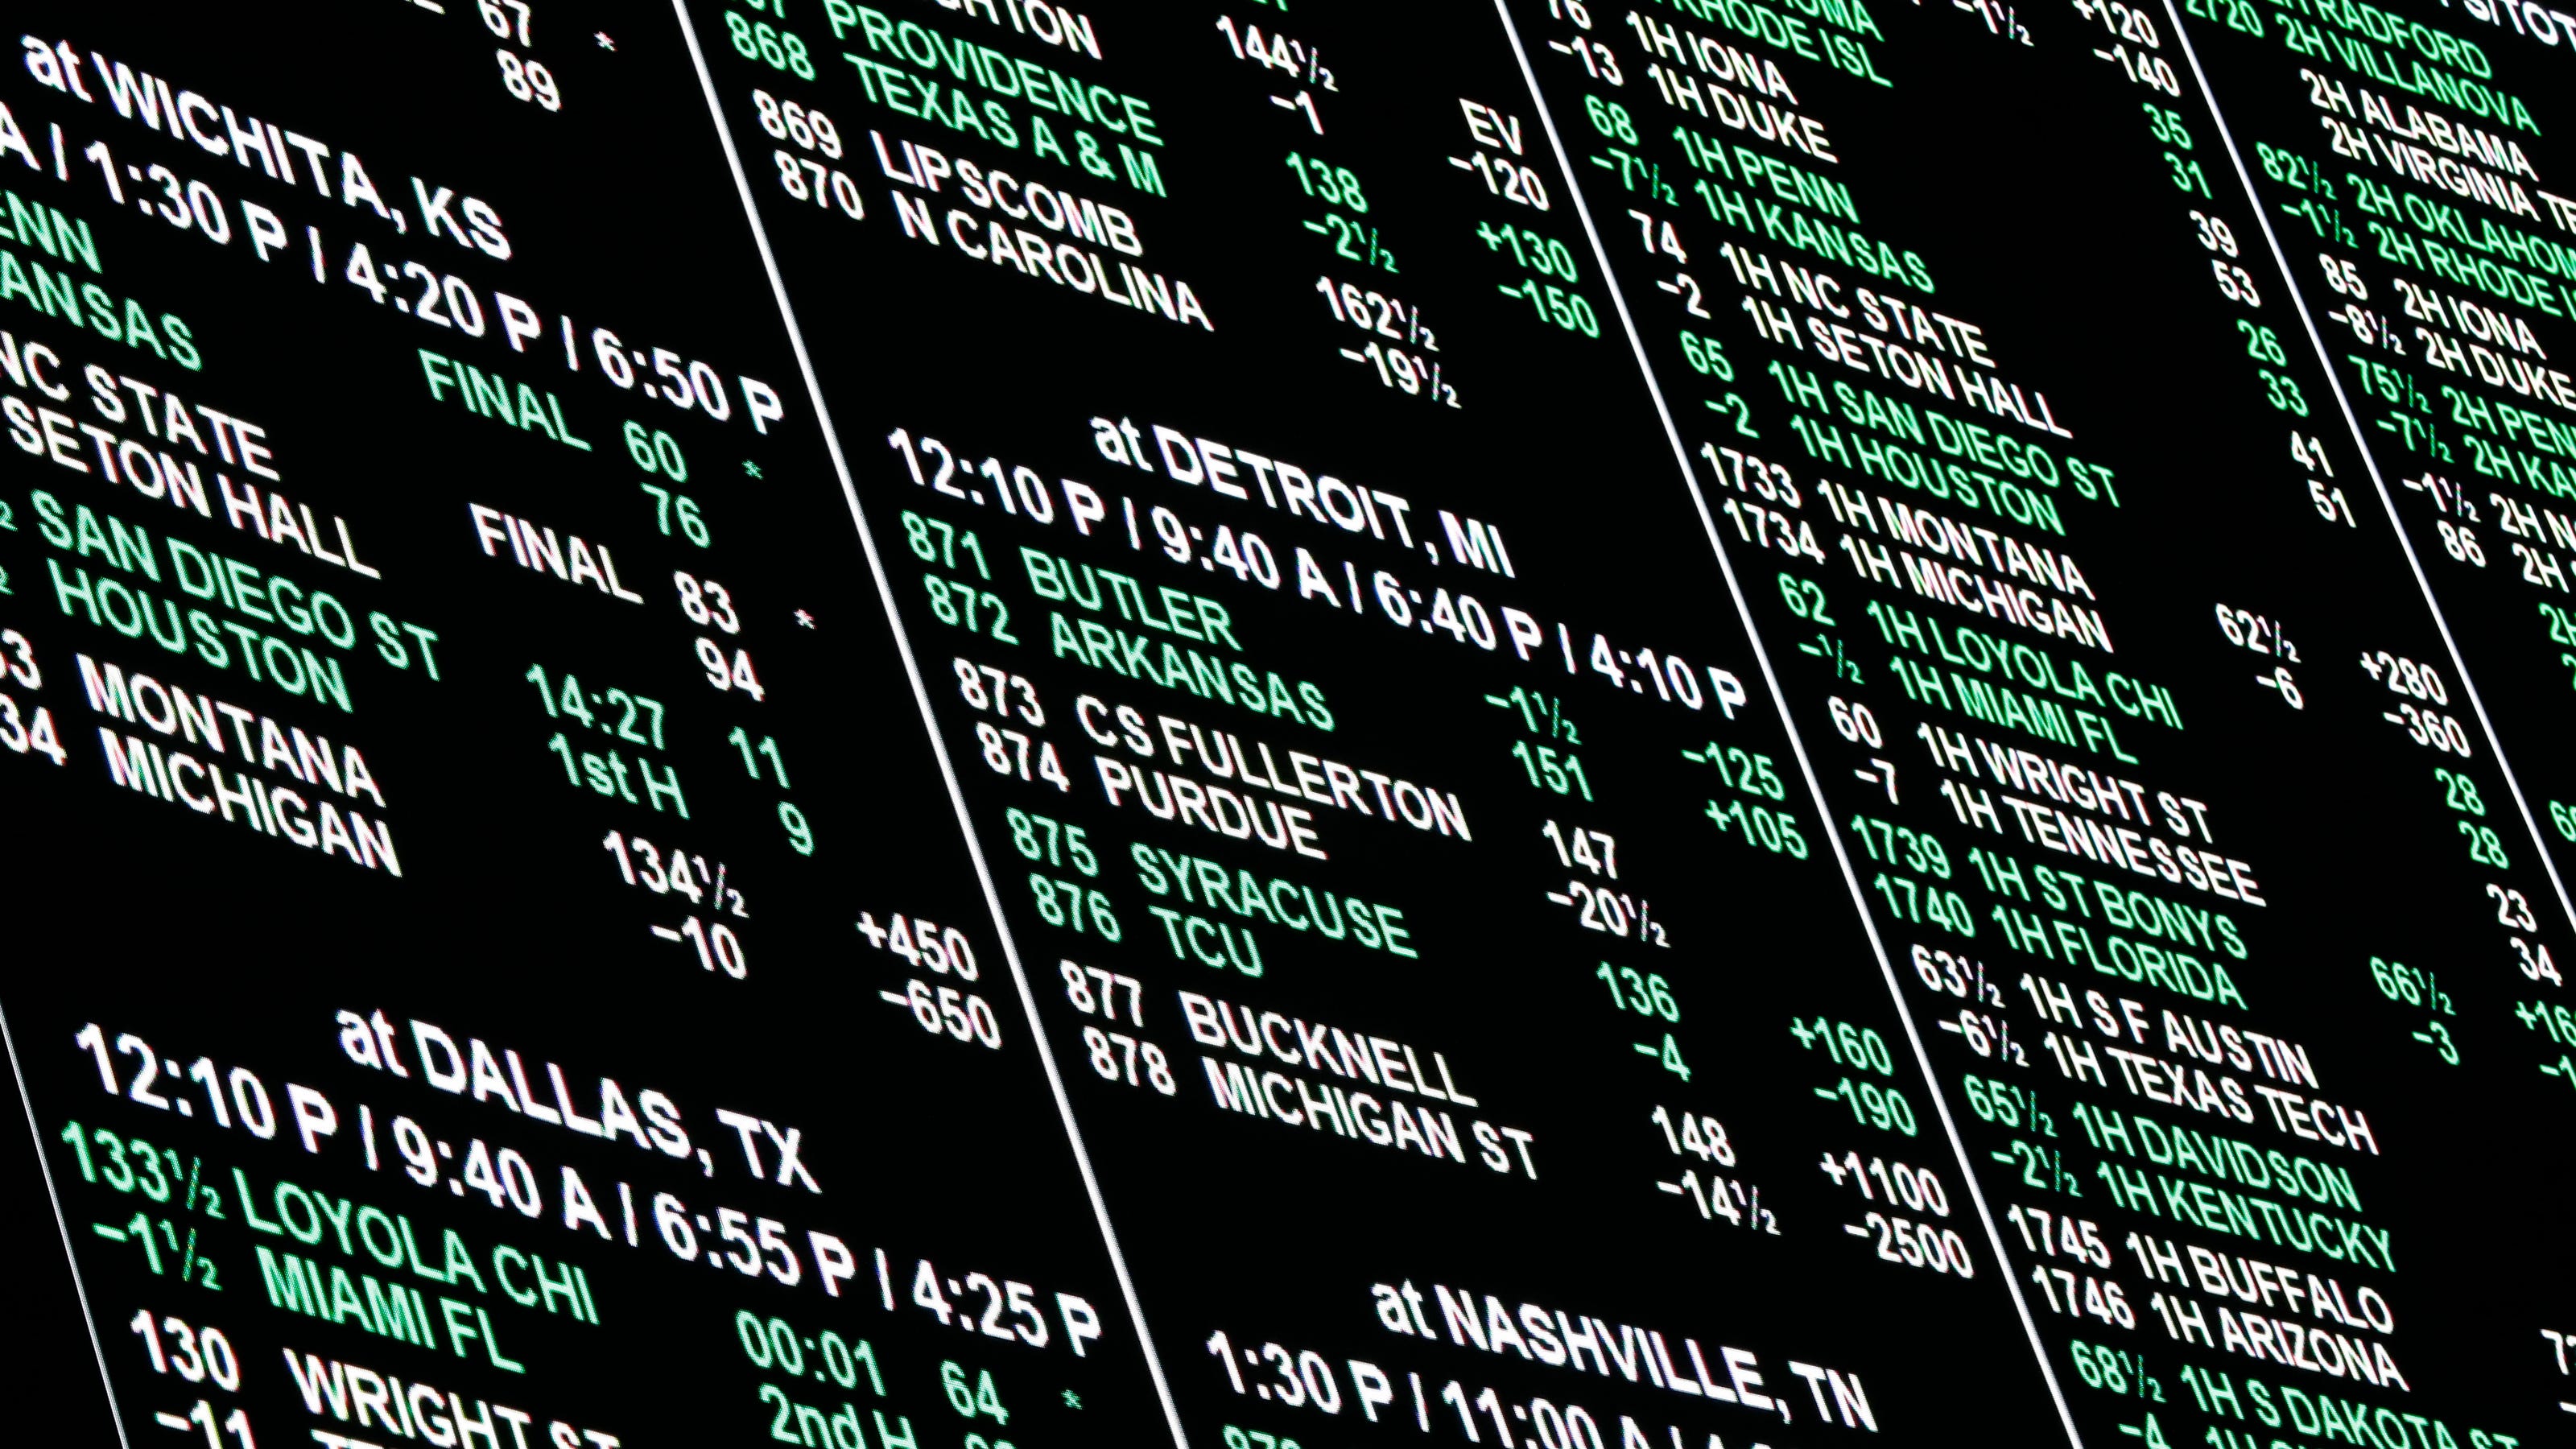 sports betting state by state guide